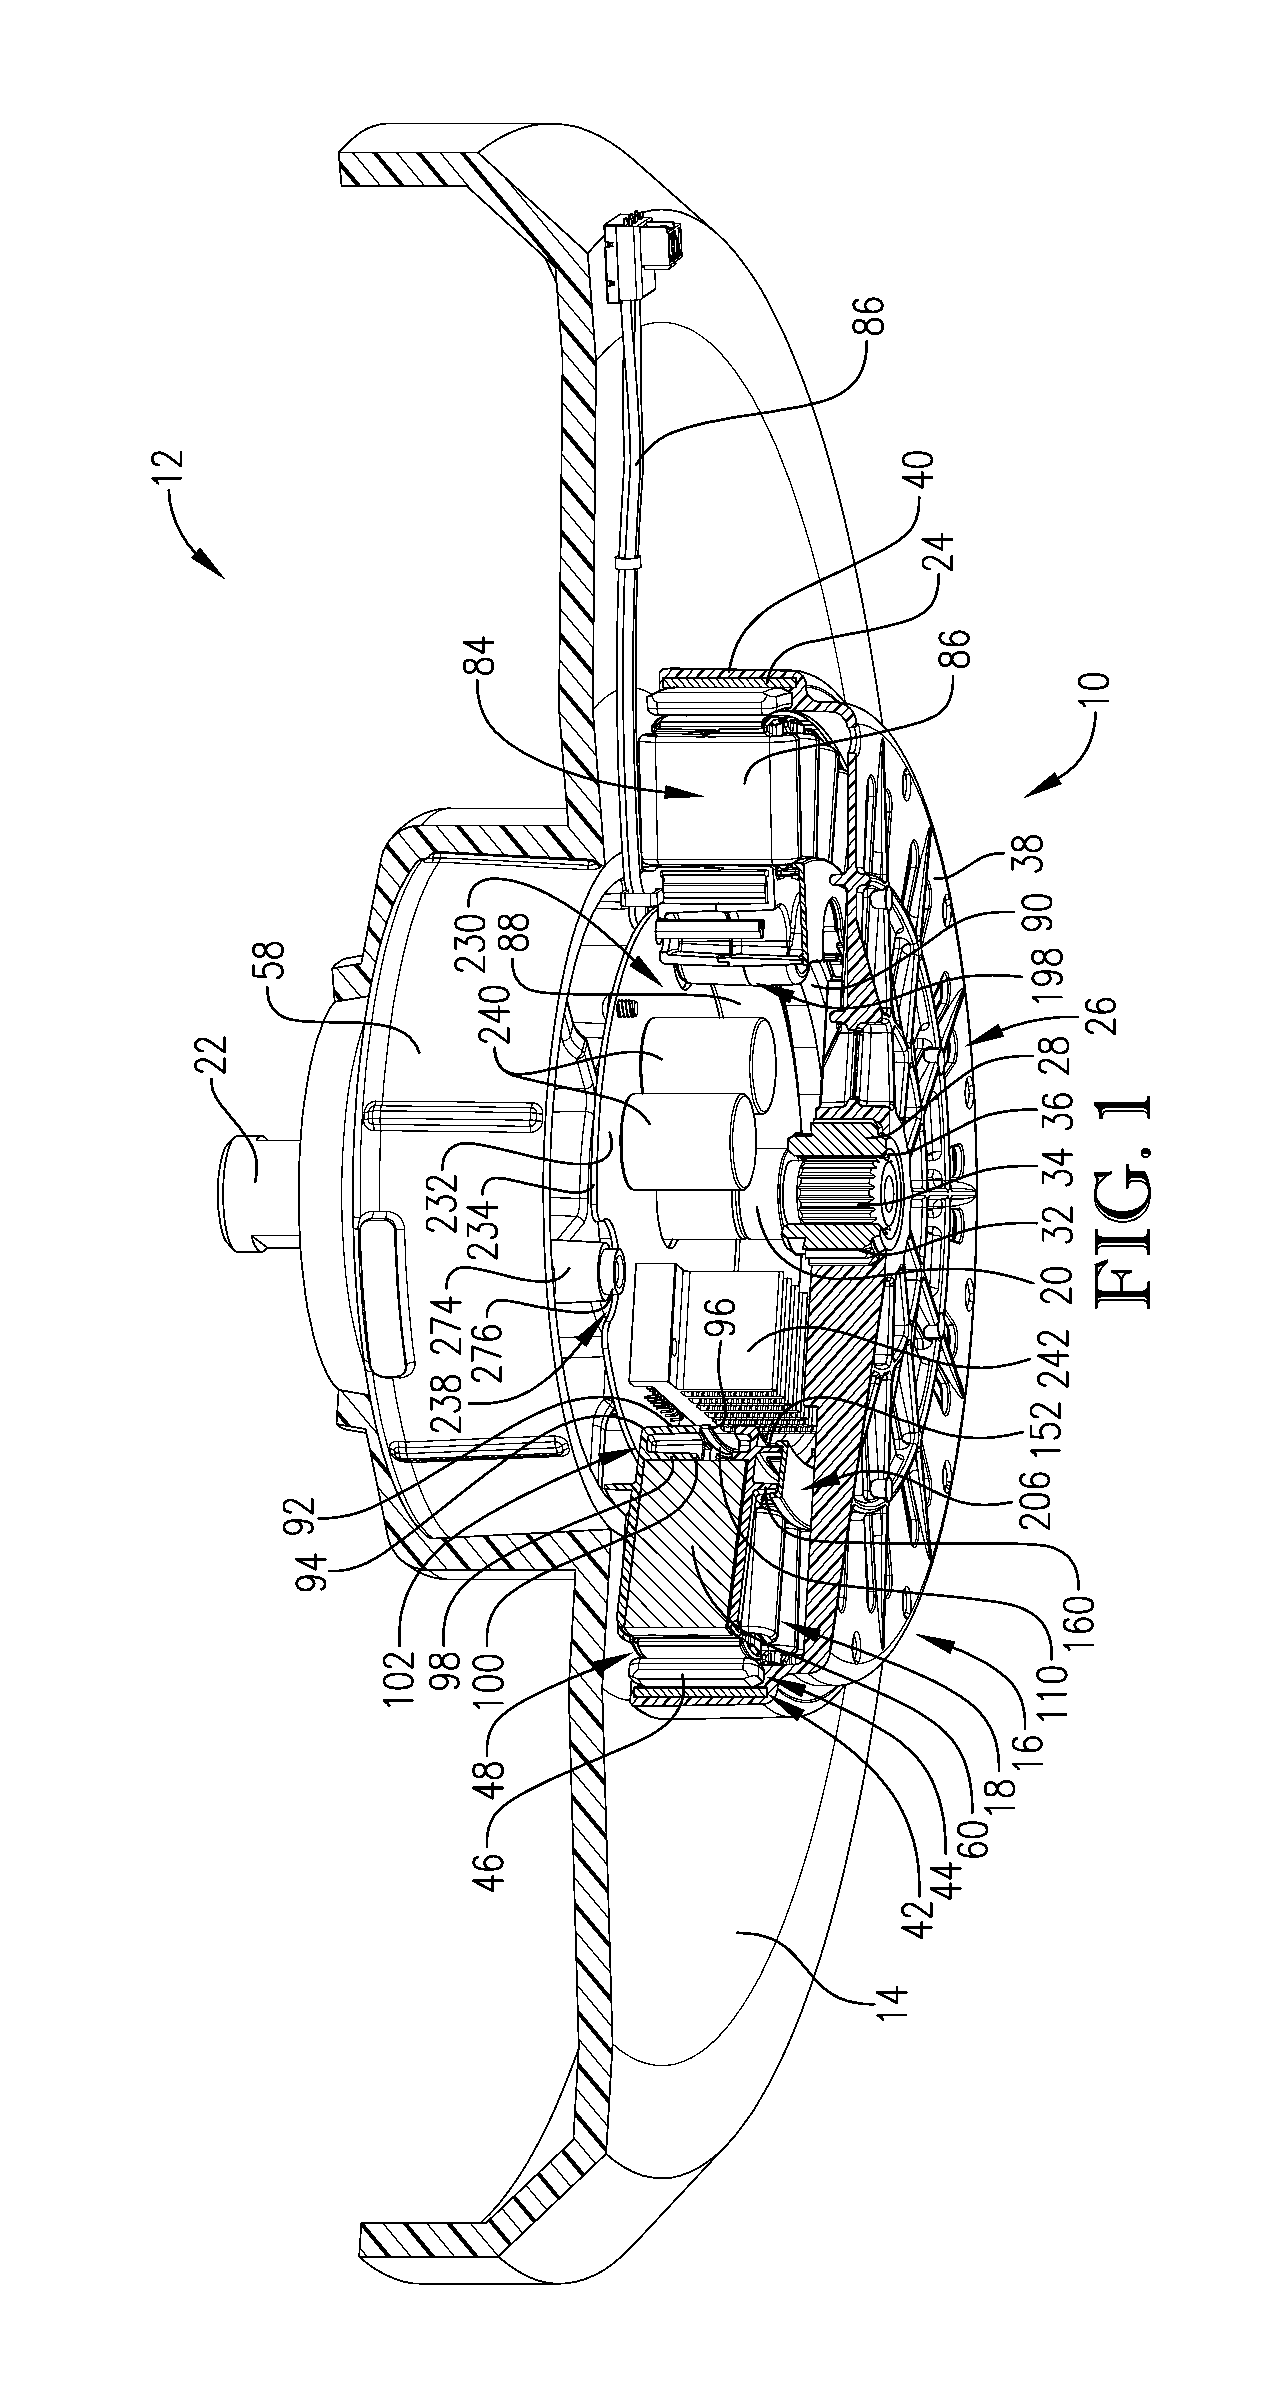 Integrated direct drive motor and control